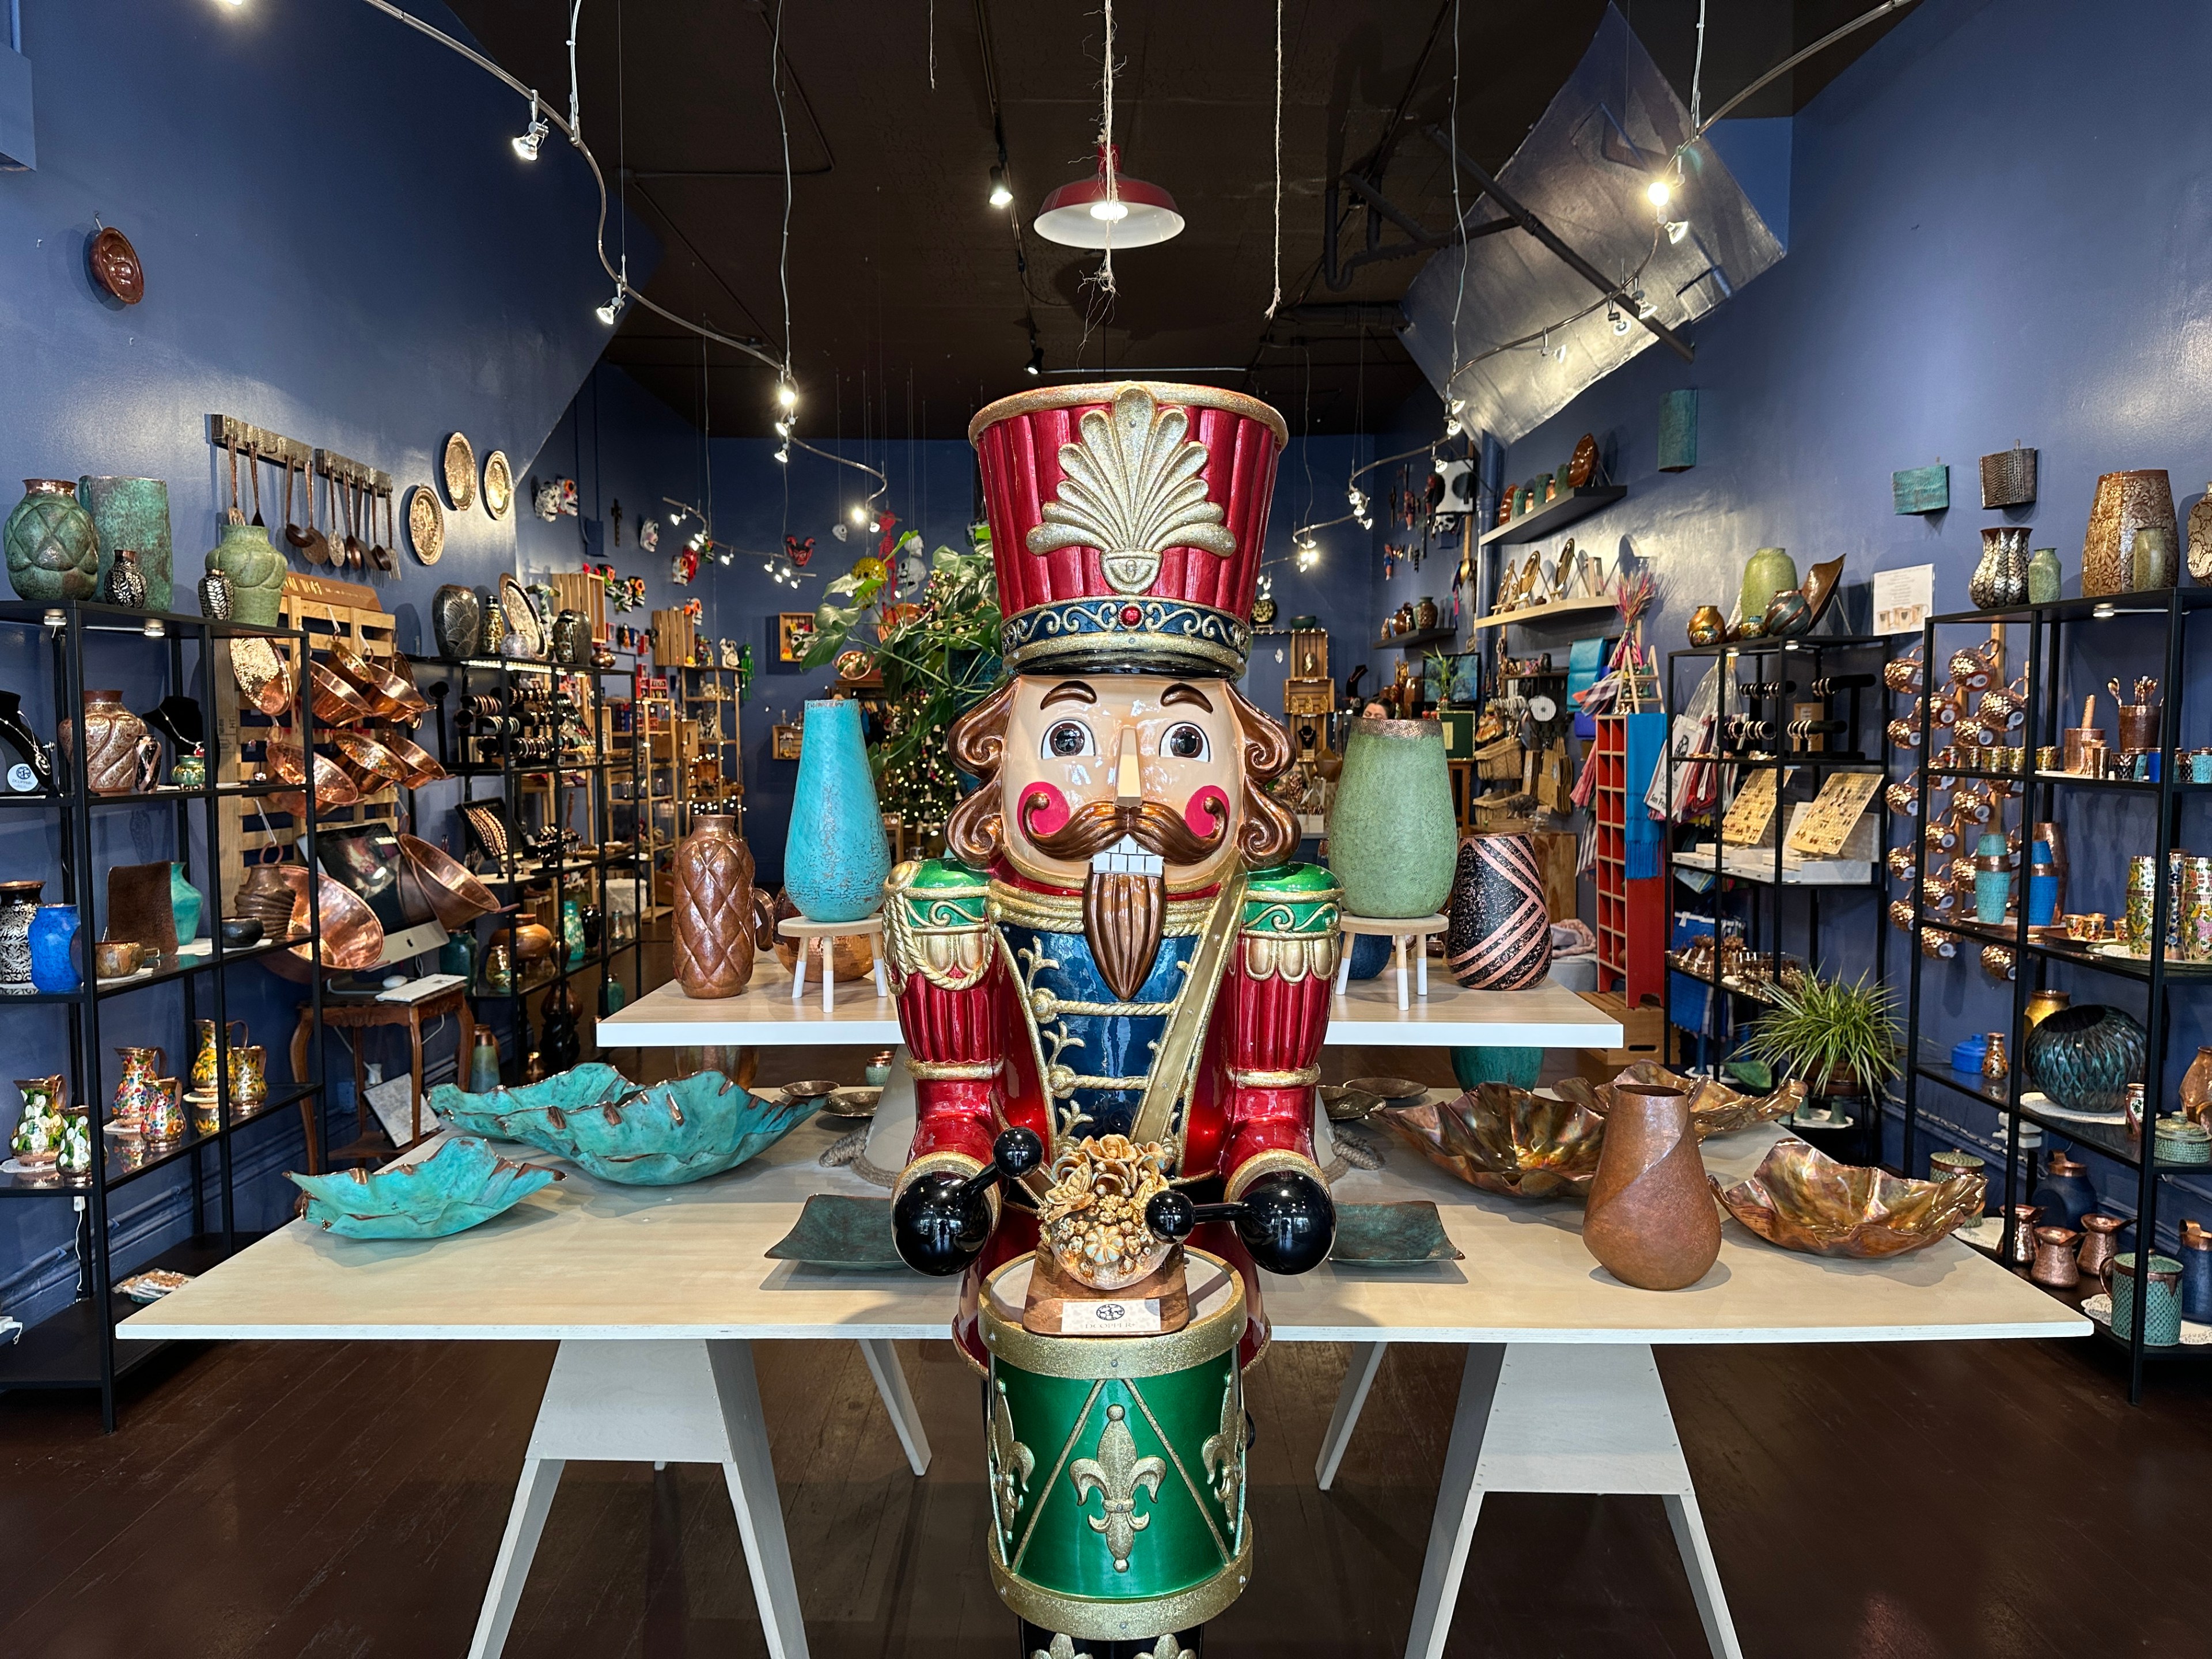 A giant Nutcracker statue stands at the entrance of a shop, which sells artisan-crafted copper vases, bowls and plates from Mexico.